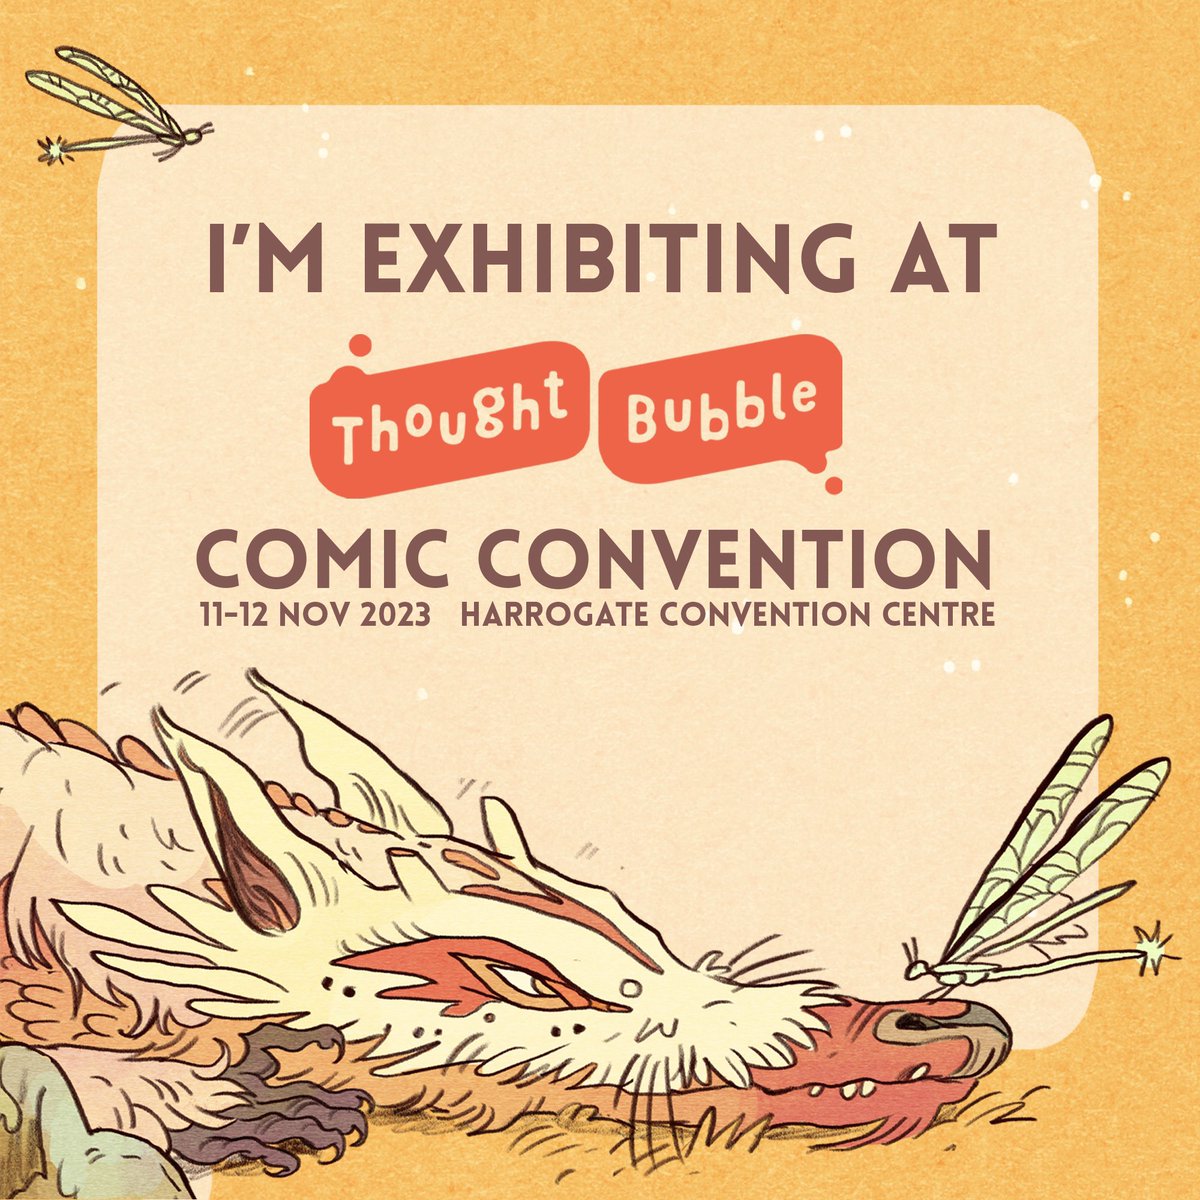 See y’all there! We’ll bring the comics. You bring the snacks.